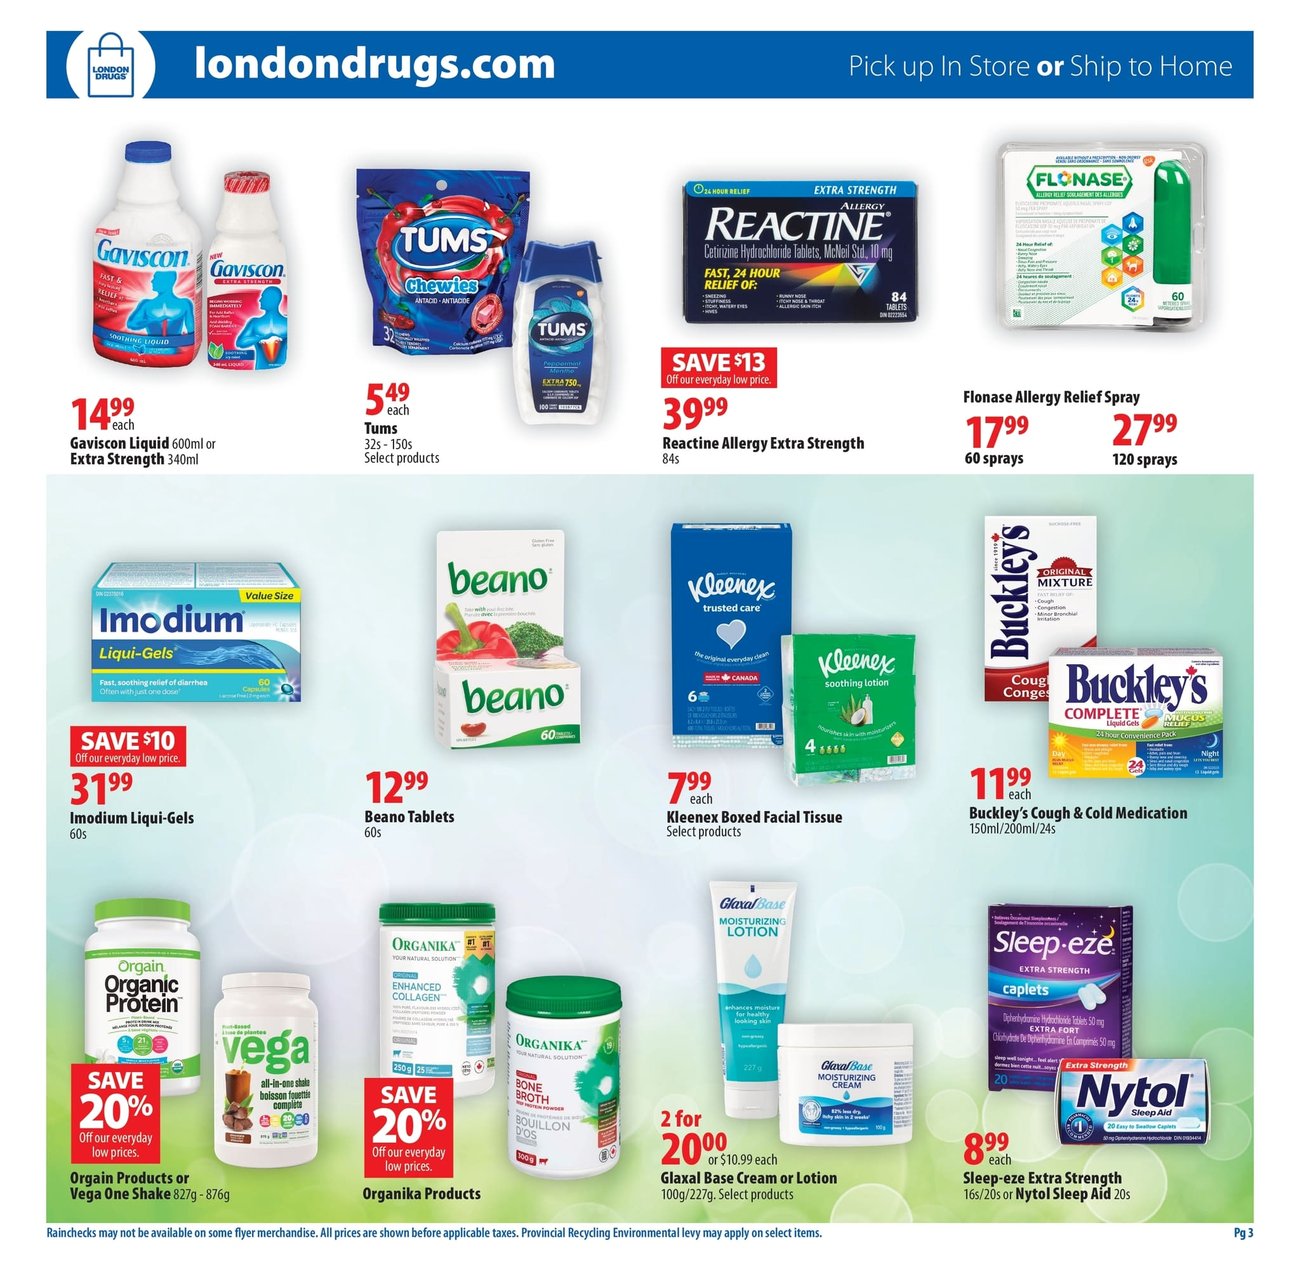 London Drugs - Healthy Savings Event - Page 3